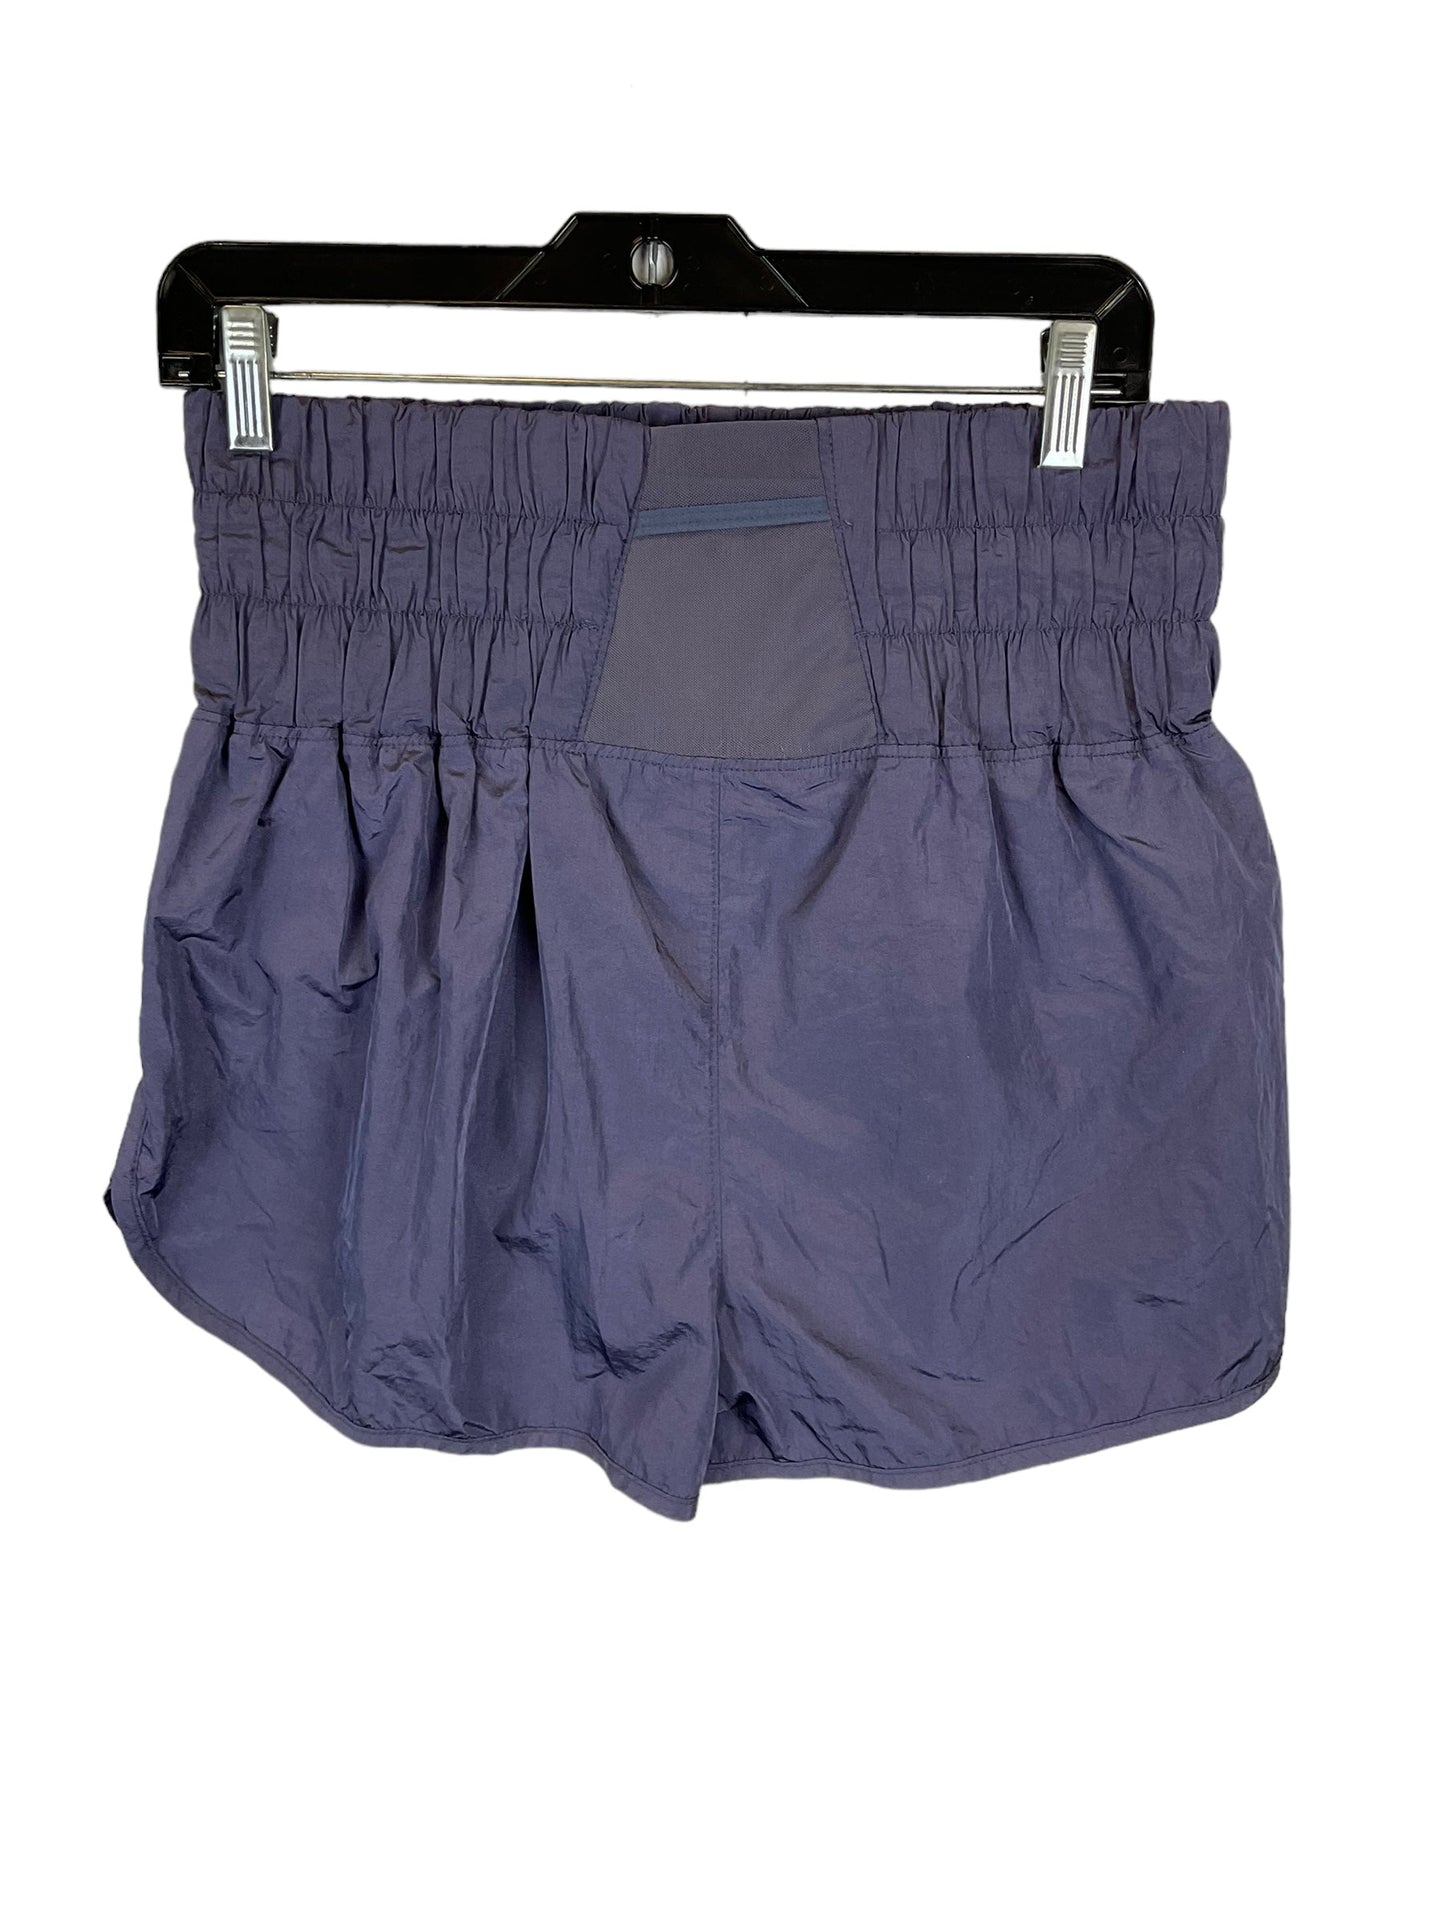 Purple Athletic Shorts Free People, Size L